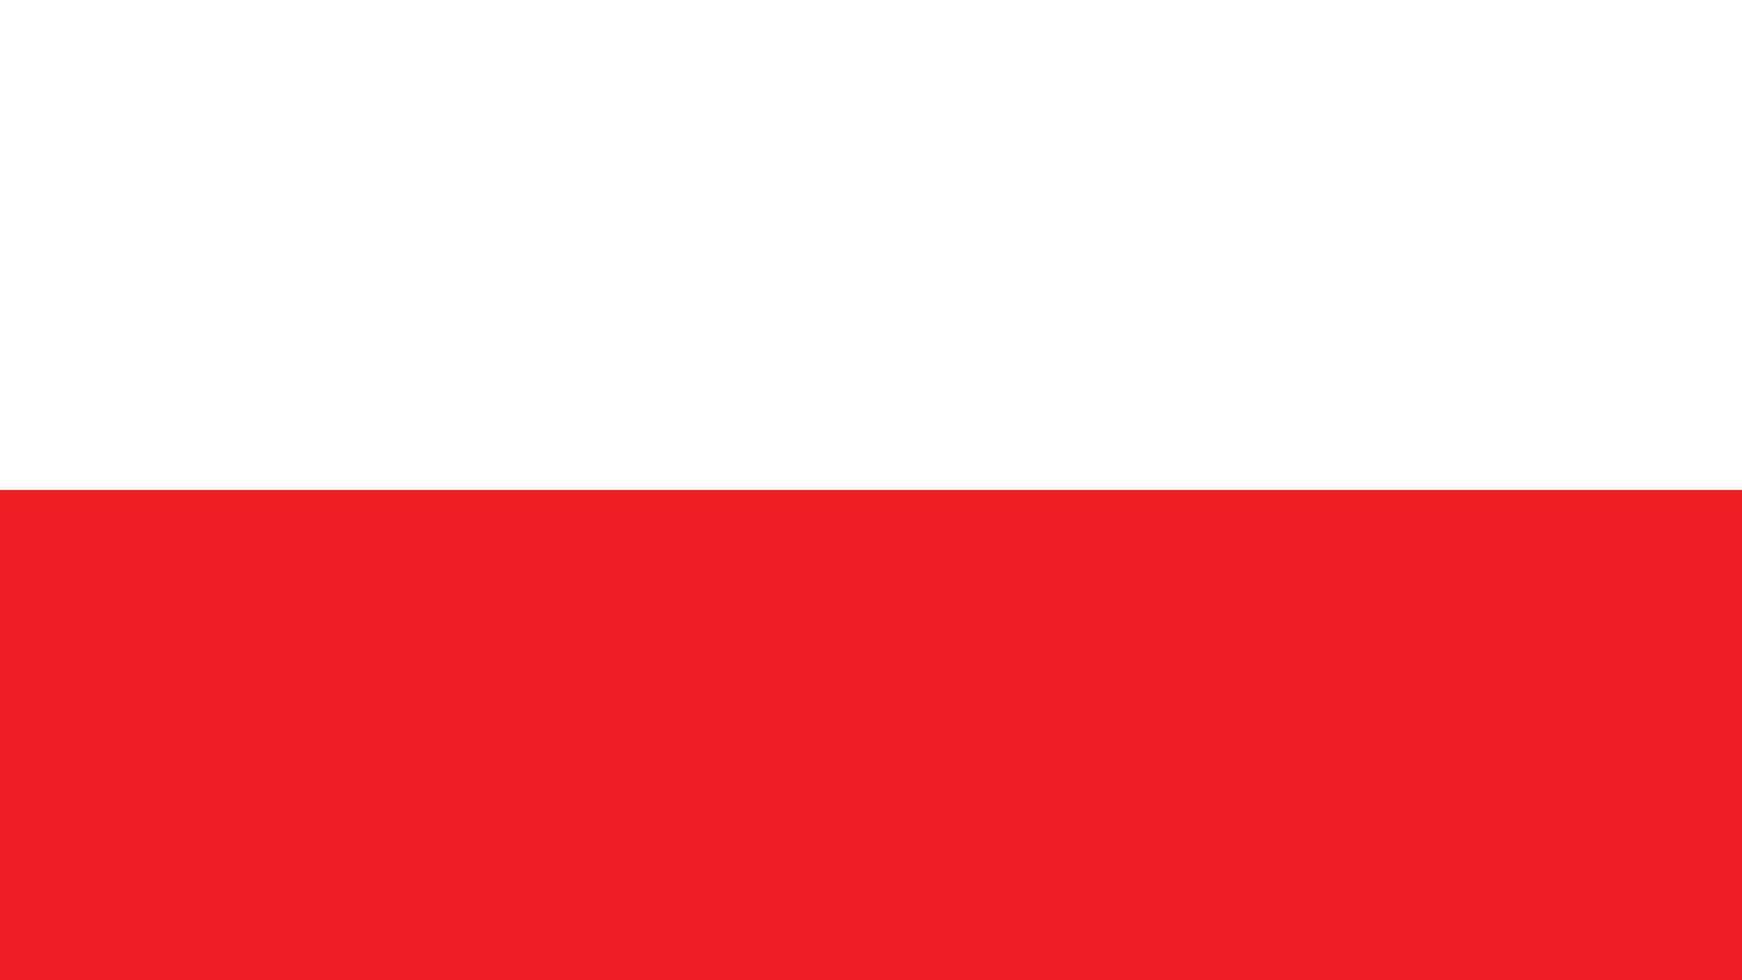 National Flag of Poland. Official Colors and Proportions - EPS10 Vector